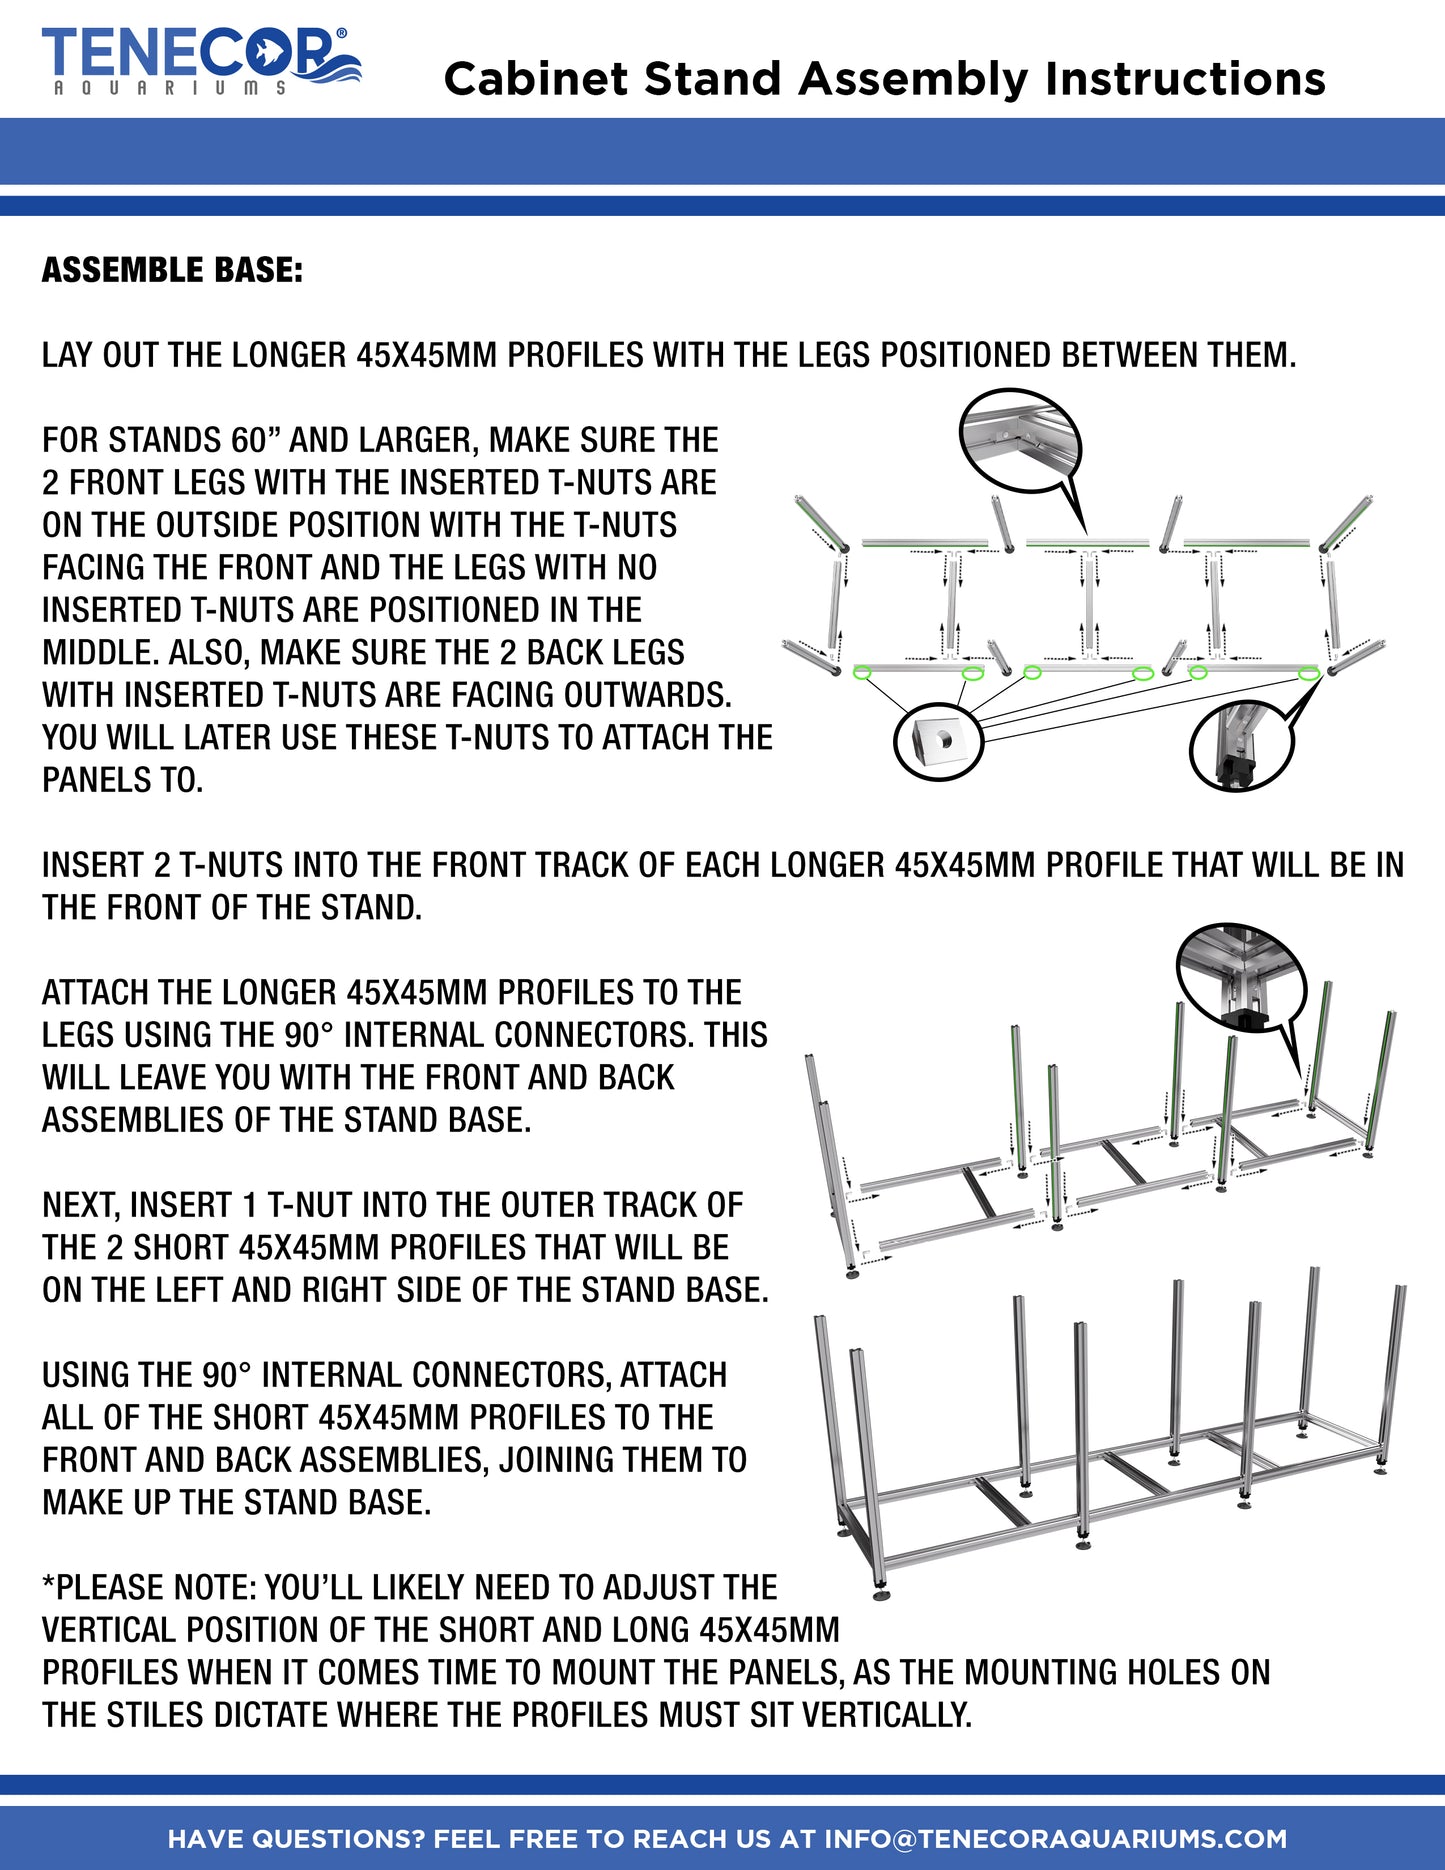 Magnum Enclosed Cabinet Stand Assembly Instructions